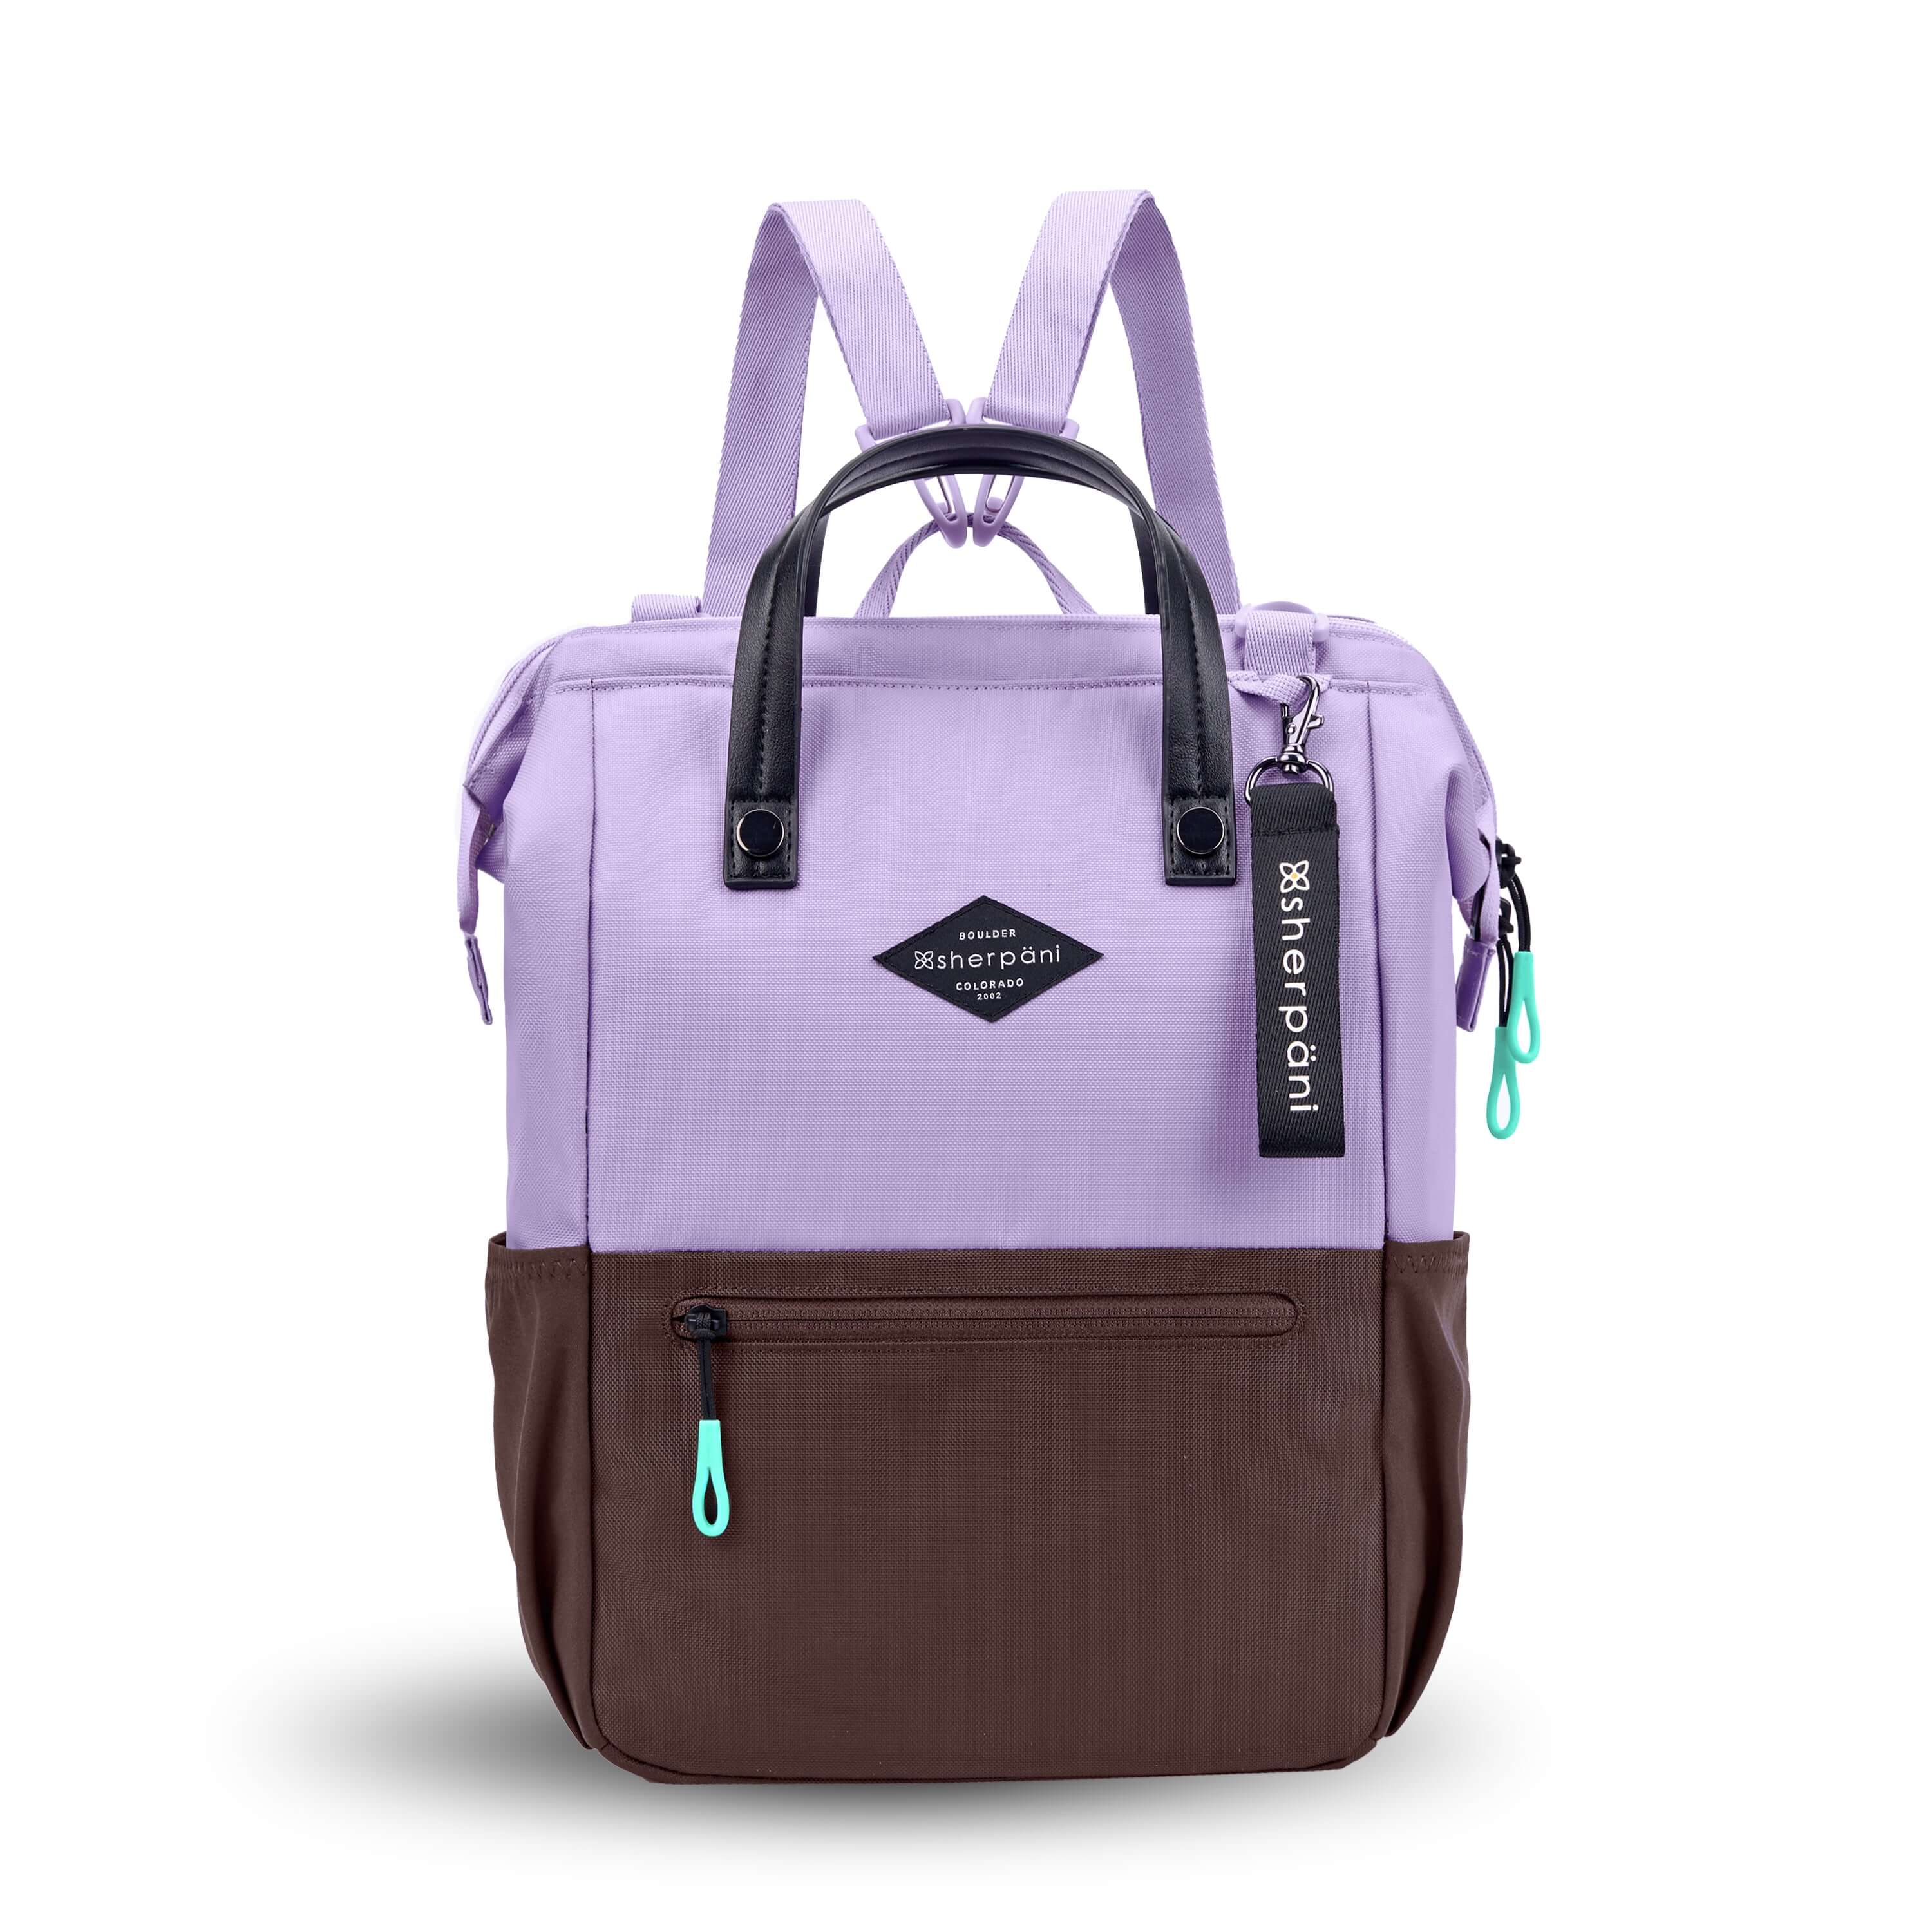 Flat front view of Sherpani three-in-one bag, the Dispatch in Lavender. The bag is two-toned: the top is lavender and the bottom is brown. There is an external zipper pocket on the front panel. Easy-pull zippers are accented in aqua. A branded Sherpani keychain is clipped to the upper right corner. Elastic water bottle holders sit on either side of the bag. It has short tote handles and adjustable/detachable straps that can function for a backpack or crossbody. 